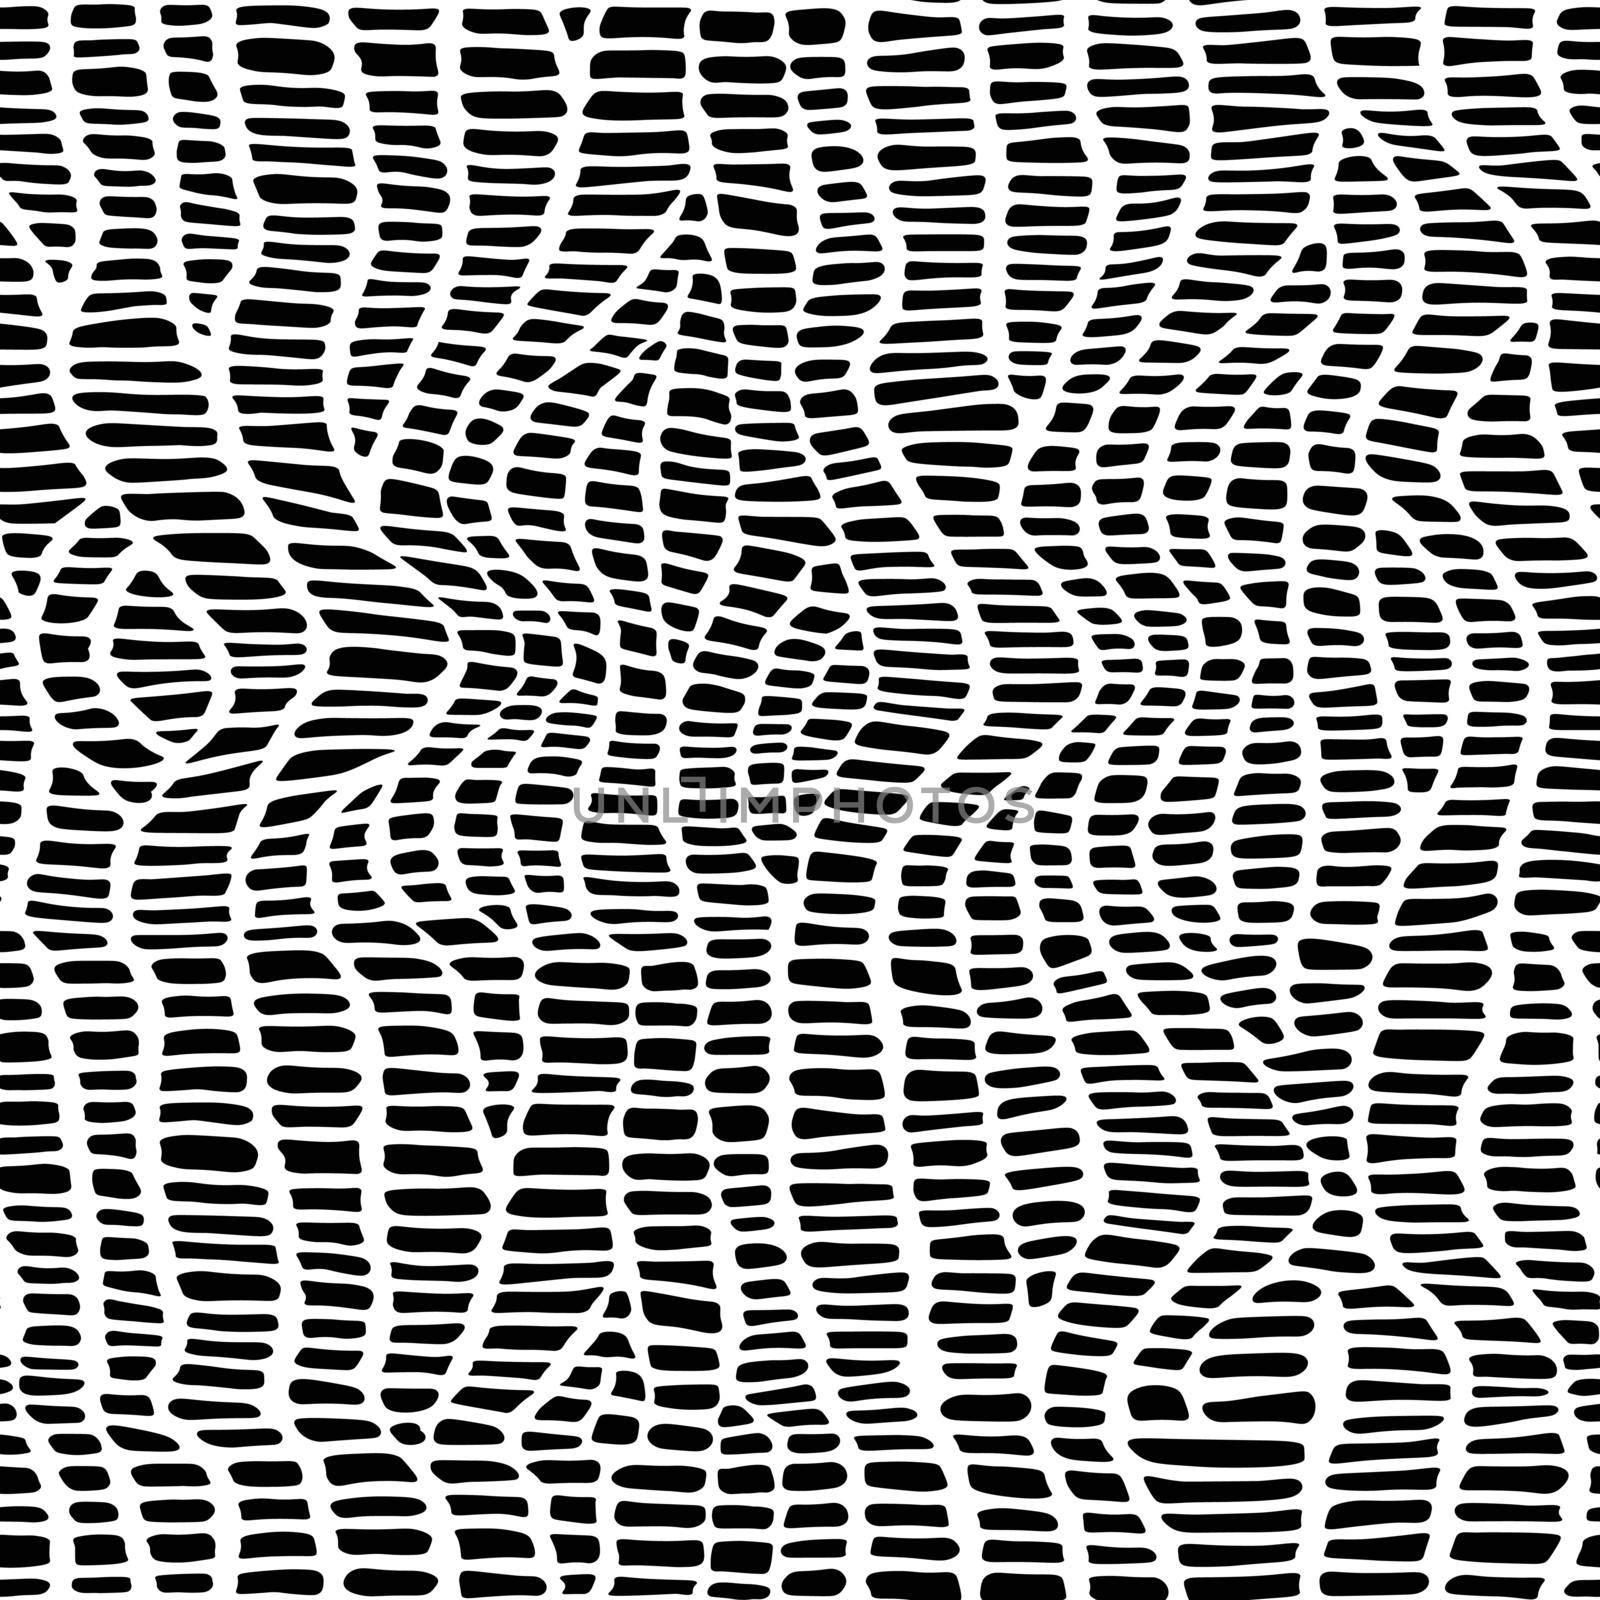 Abstract modern crocodile leather seamless pattern. Animals trendy background. Black and white decorative vector illustration for print, fabric, textile. Modern ornament of stylized alligator skin.